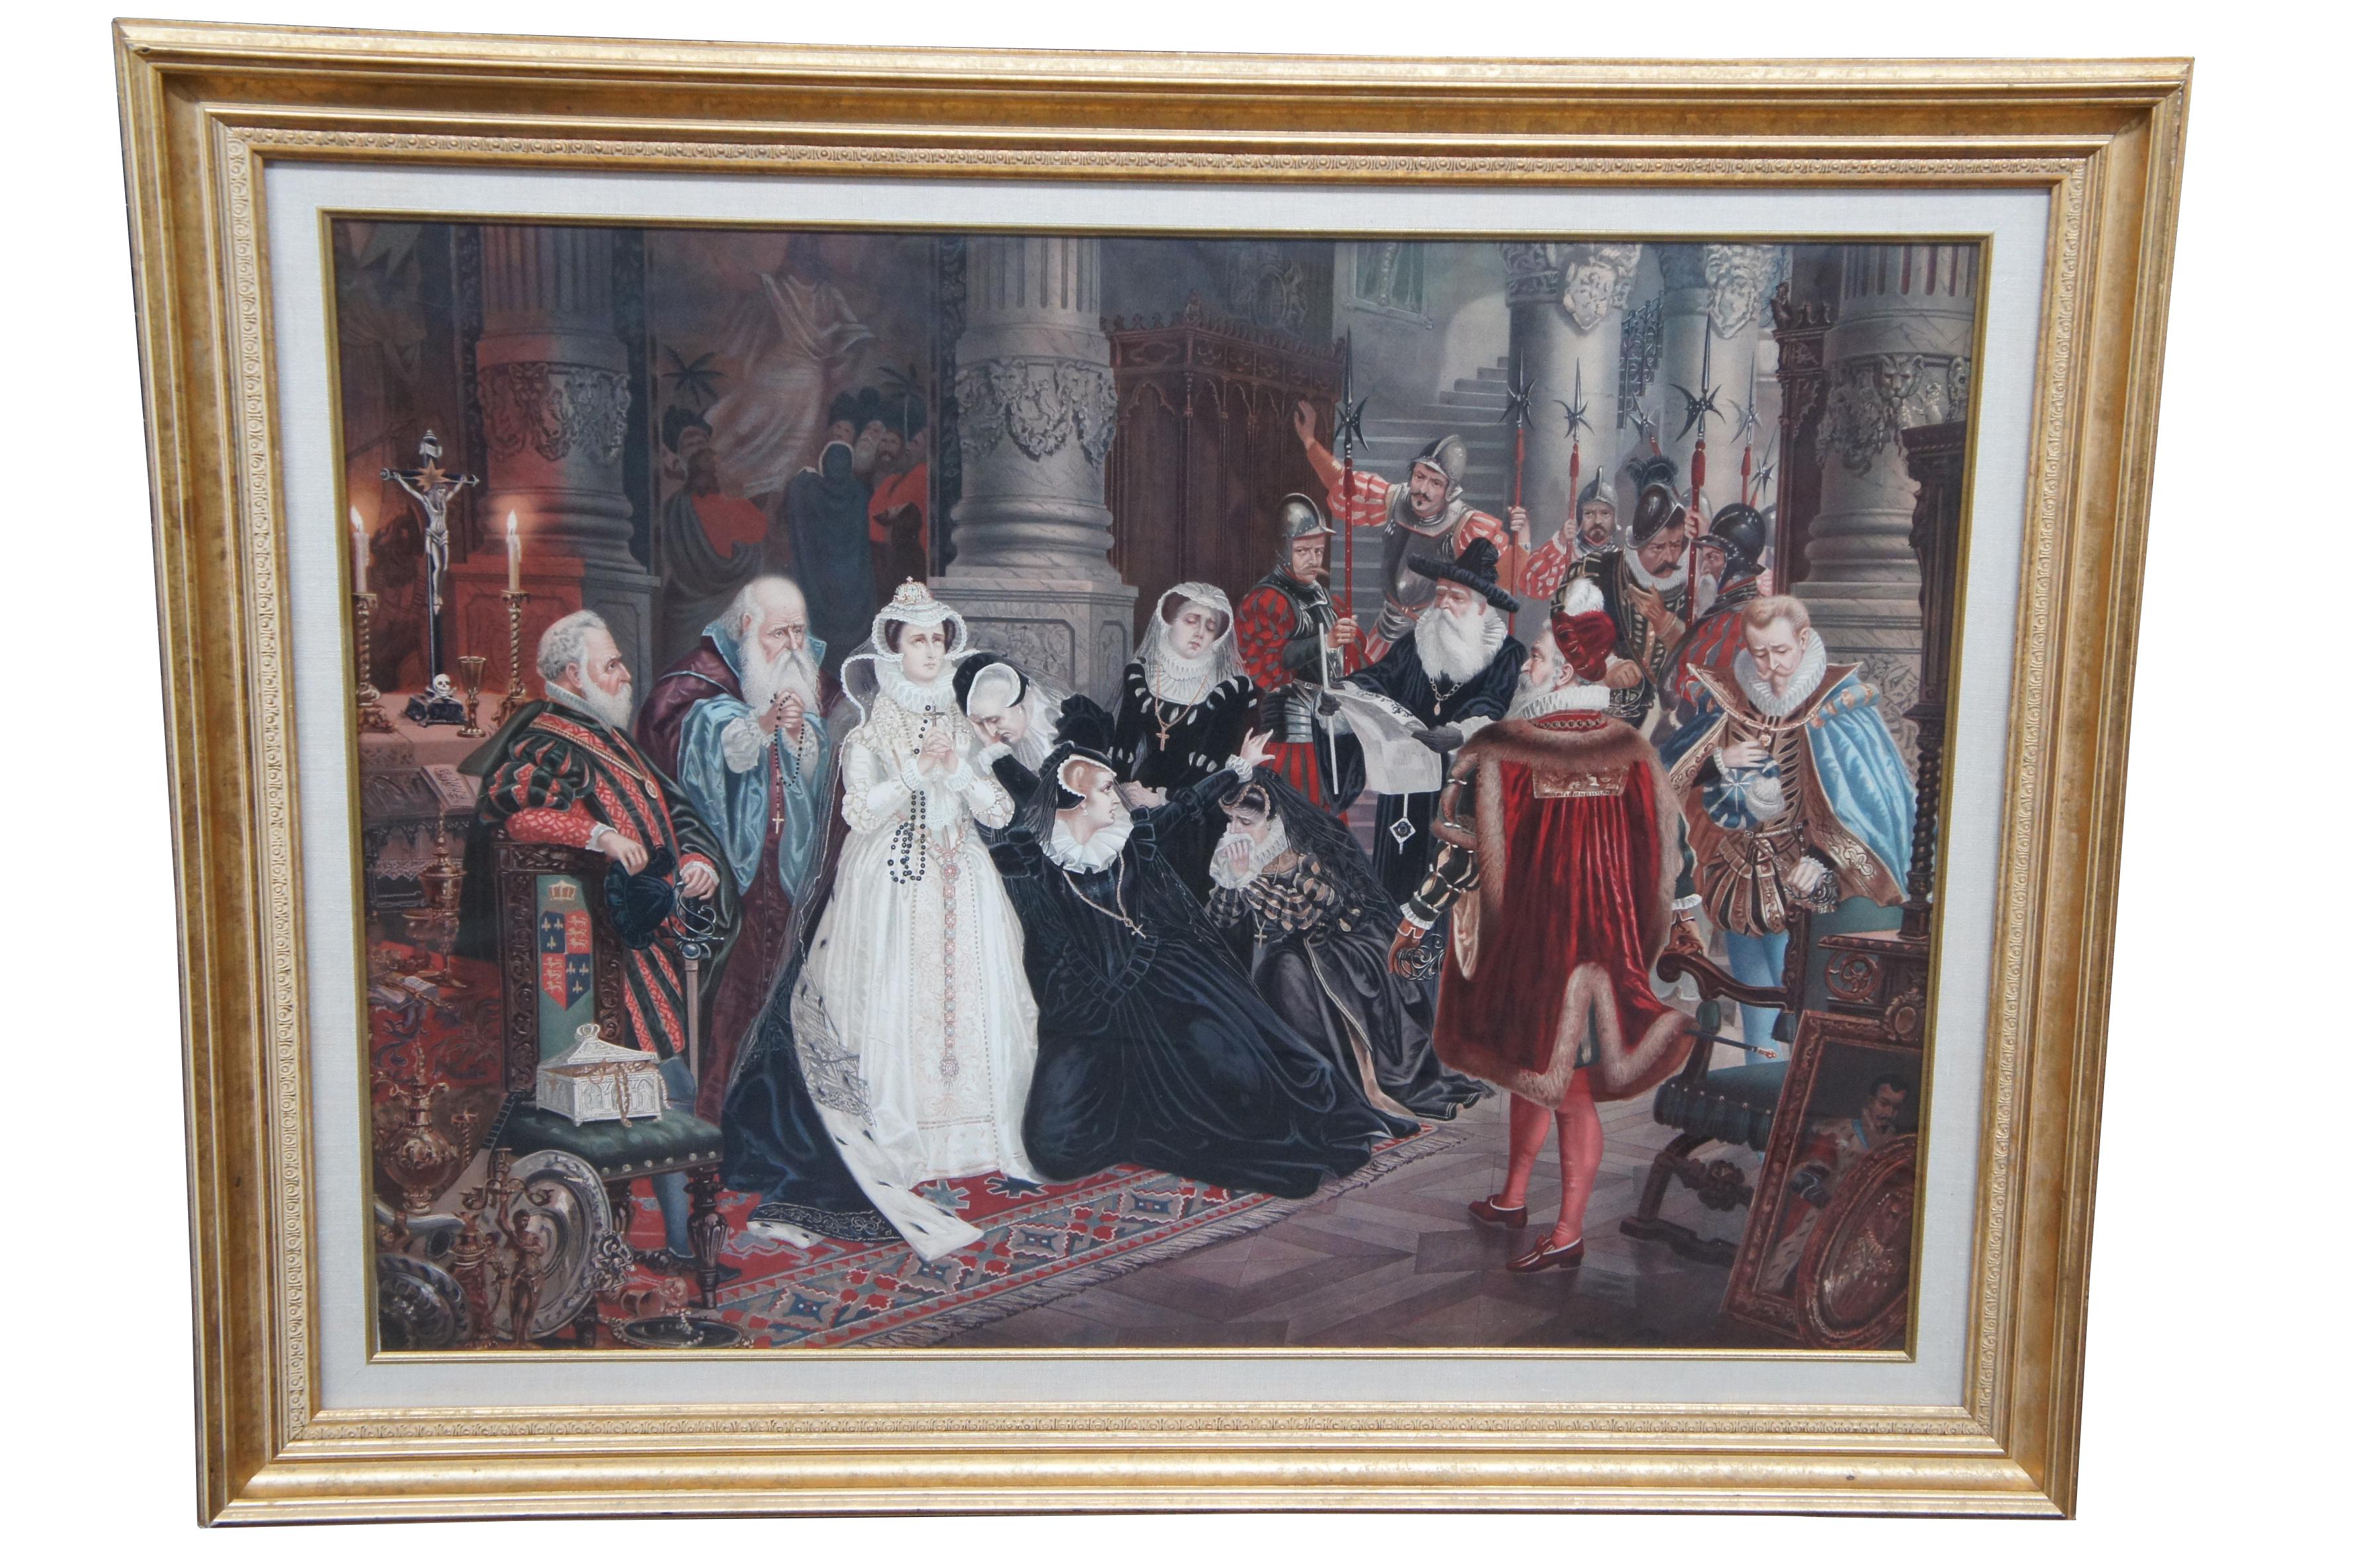 Two vintage Elizabethan court scene prints.  One features Queen Elizabeth banishing a pheasant, while the other features praying clergy and weeping women.  The elaborate attire and decor of the 16th century is on full display with rugs, tapestries,